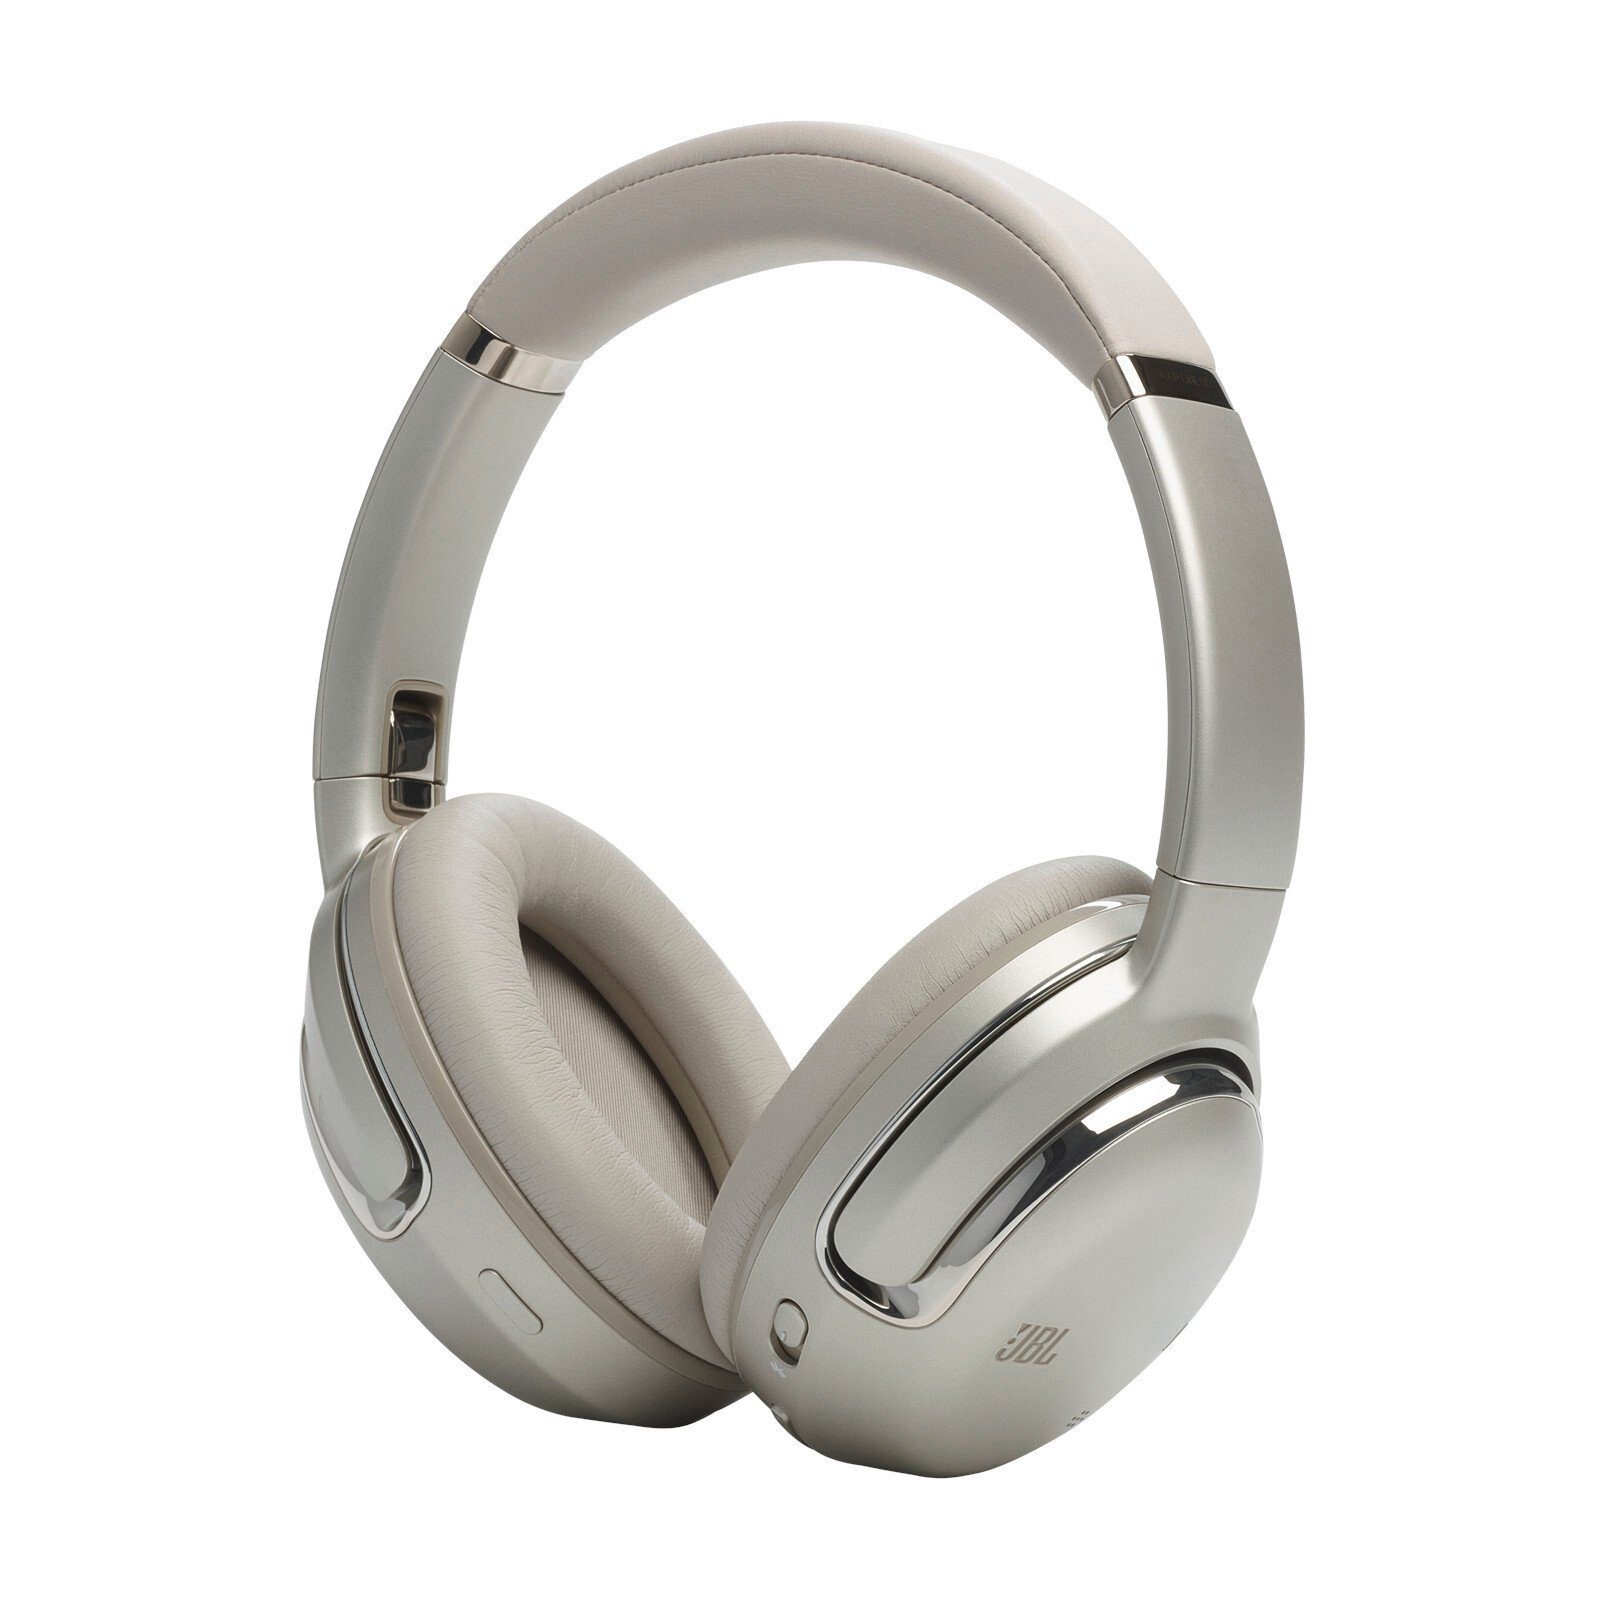 (Noise-Cancelling) JBL Headset TOUR M2 Champagne ONE